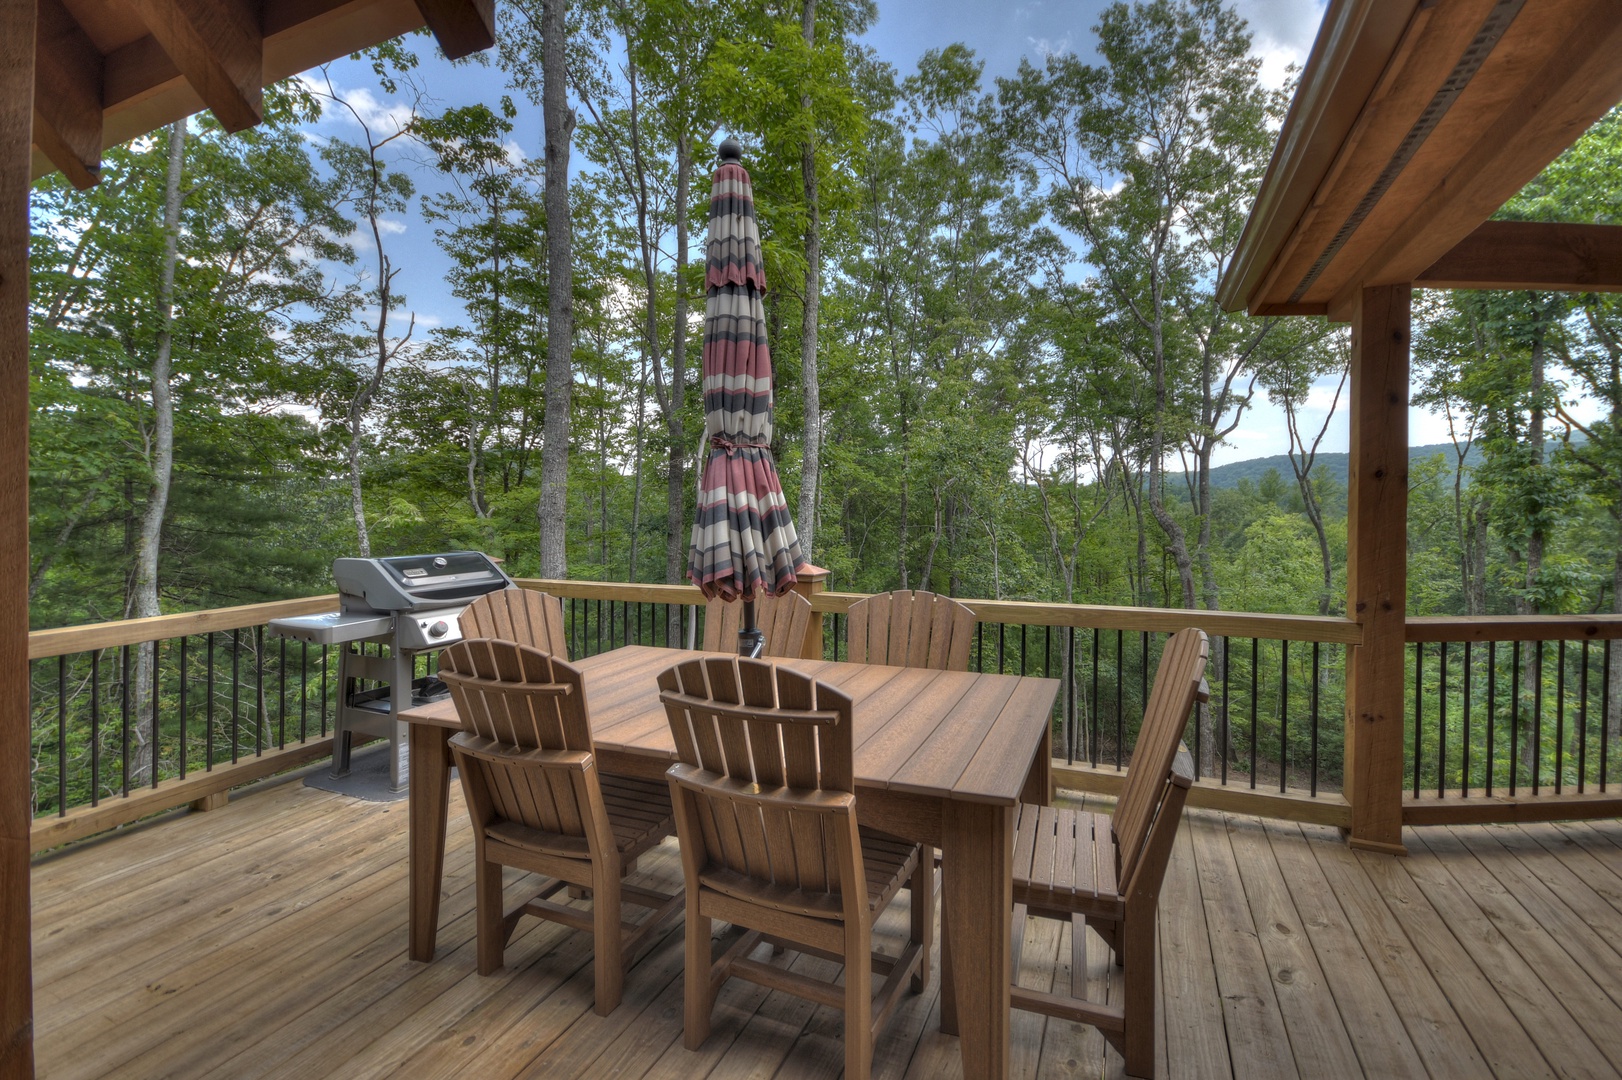 Deer Trails Cabin - Entry Level Deck Dining Table and Gas Grill